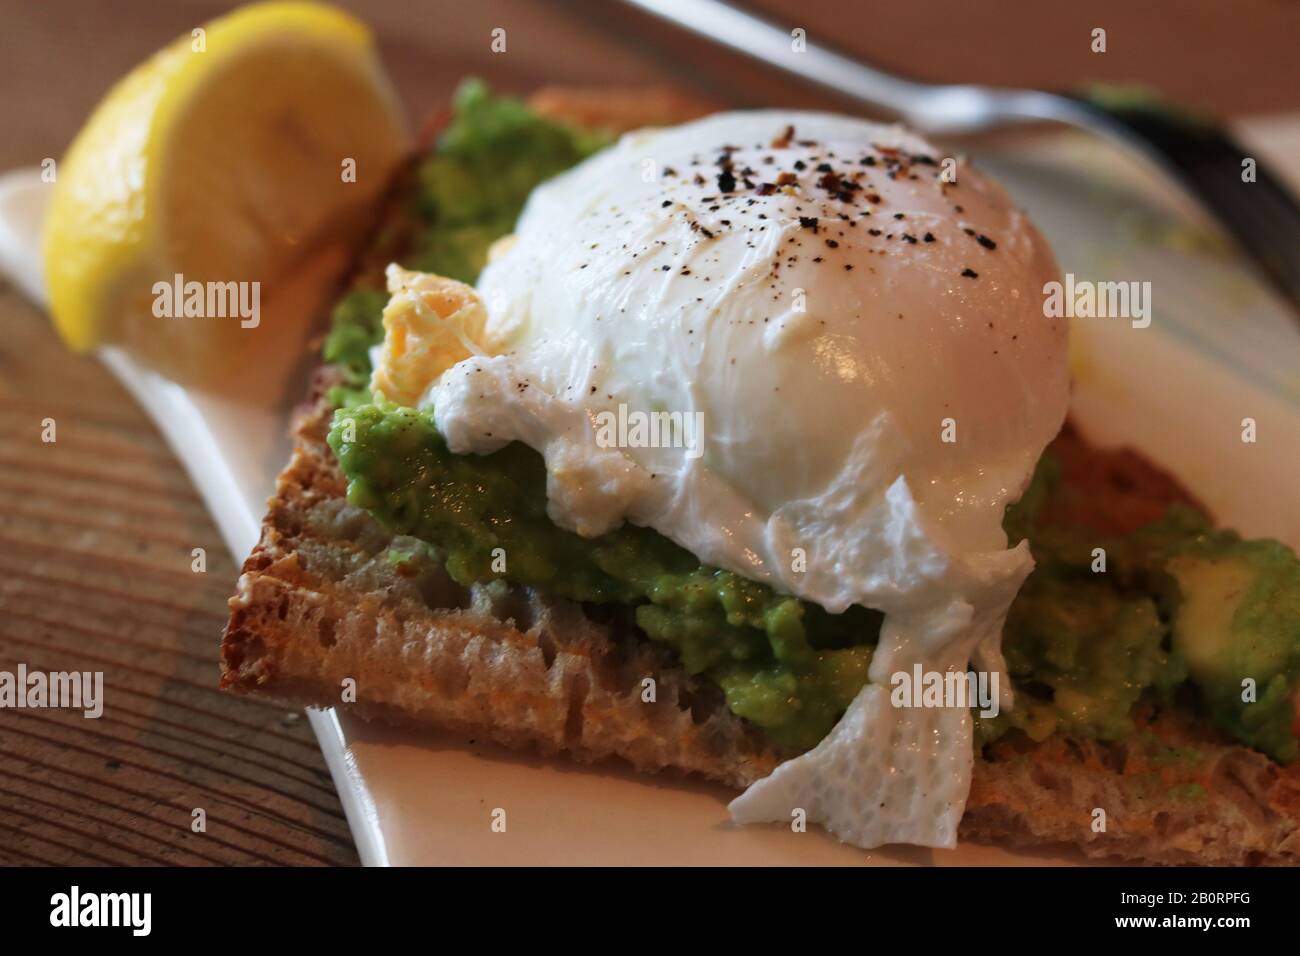 Poached egg with pepper on guacamole with toast and a wedge of lemon Stock Photo